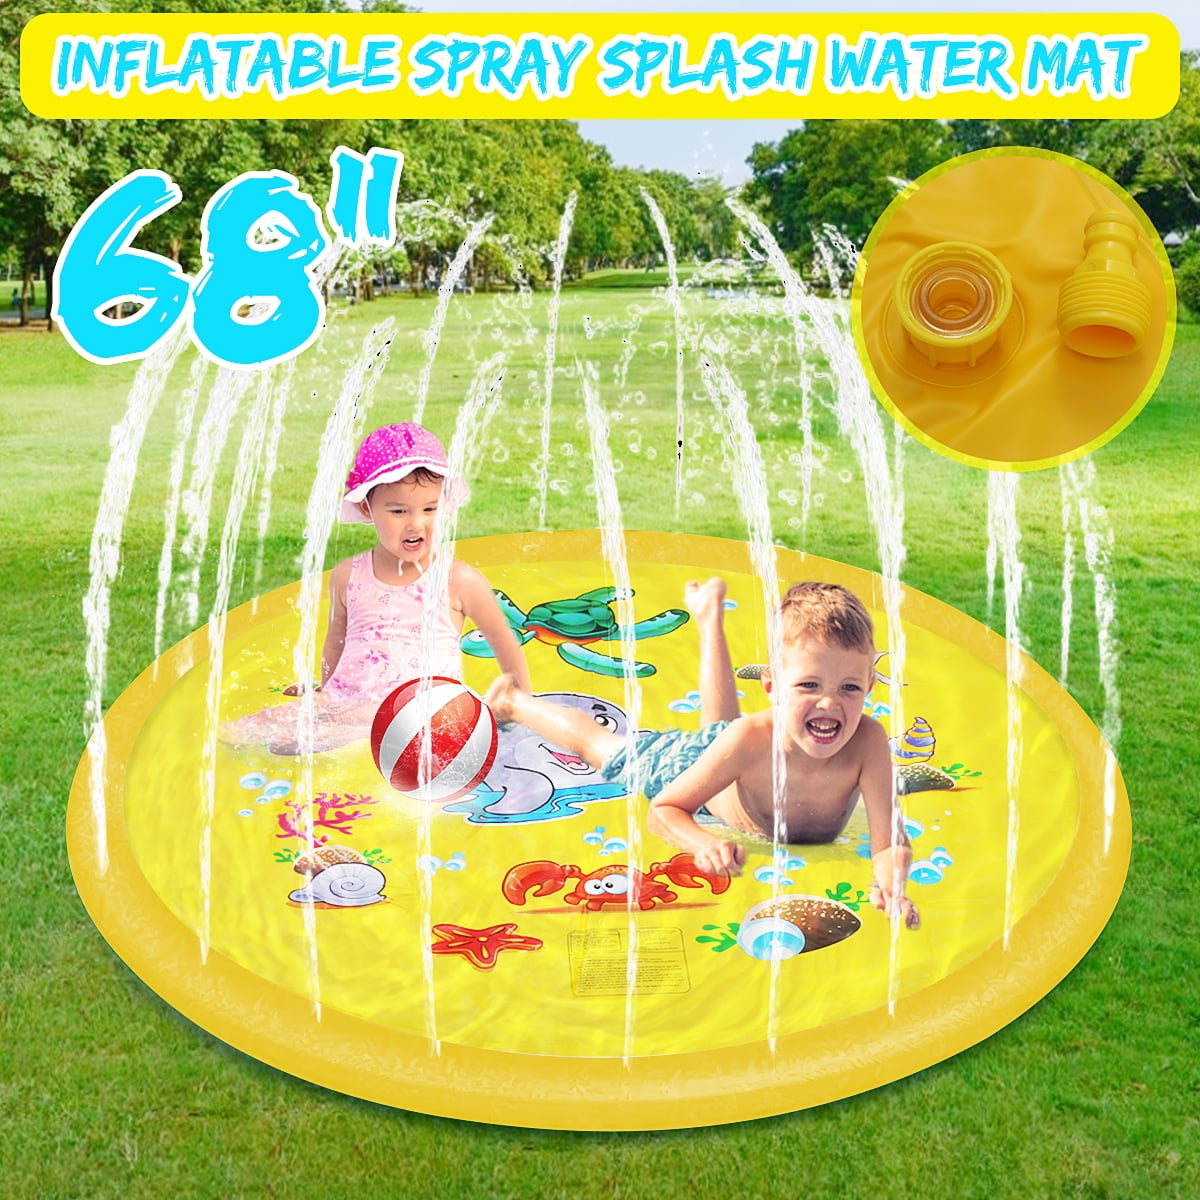 Baby Pool,Shark Sprinkler Inflatable Kiddie Pool for Toddlers with Canopy,Splash Padding Pool with Bubble Base for Kids Indoor/Outdoor Garden Backyard Summer Beach Water Fun,6 Months to 3 Years Old 